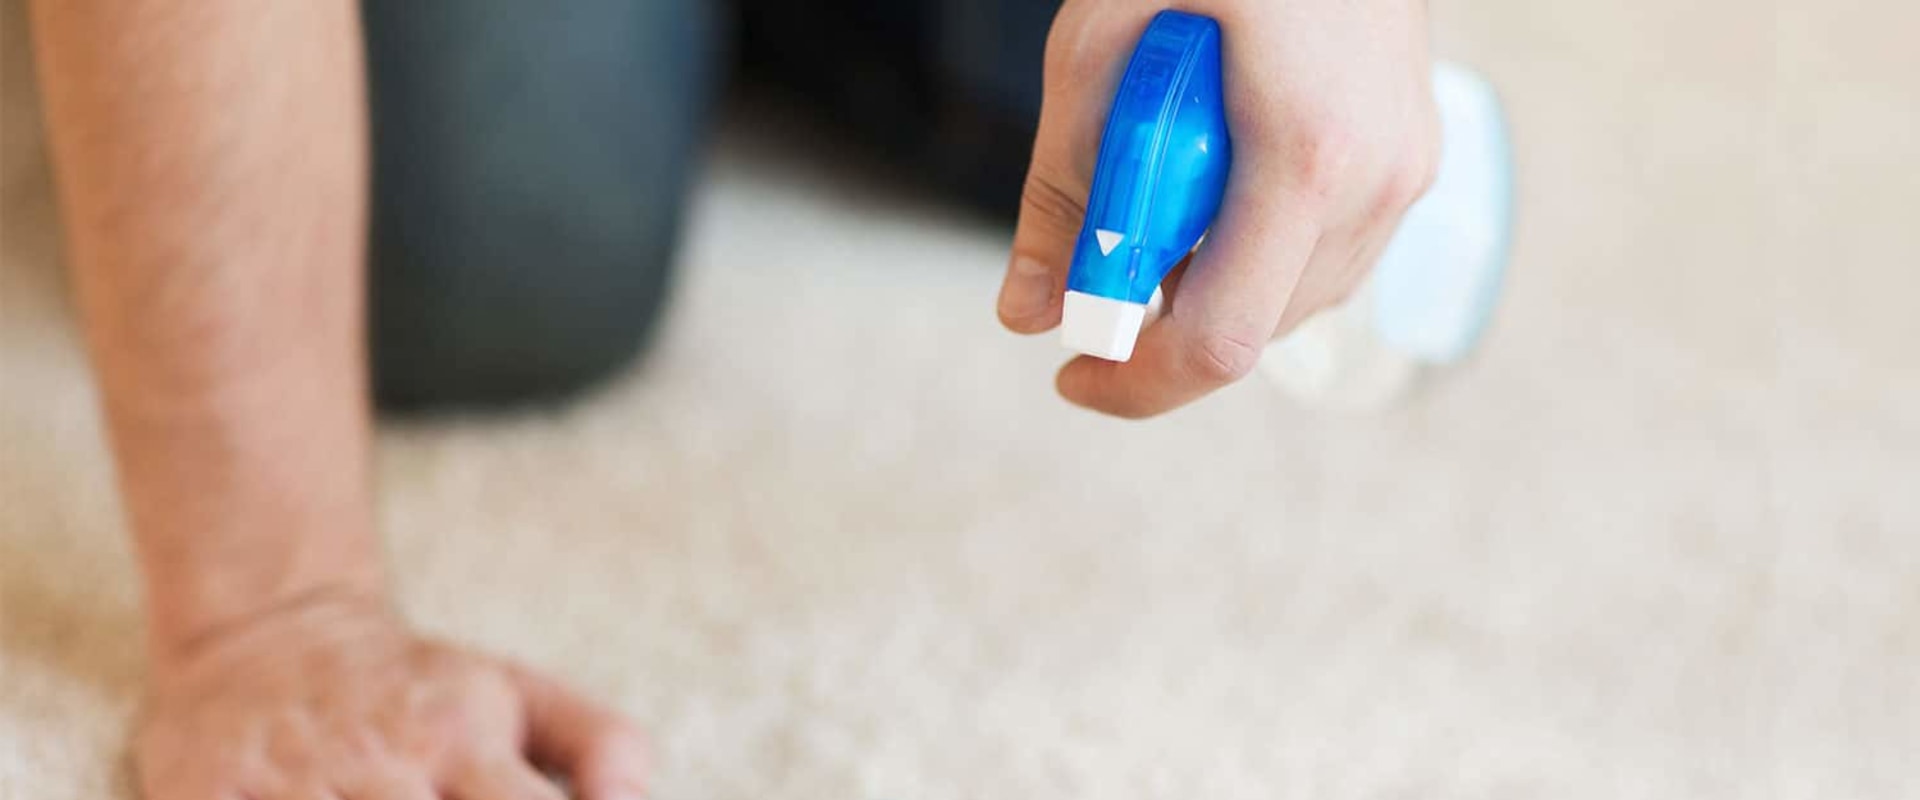 What is the best homemade carpet cleaning solution?